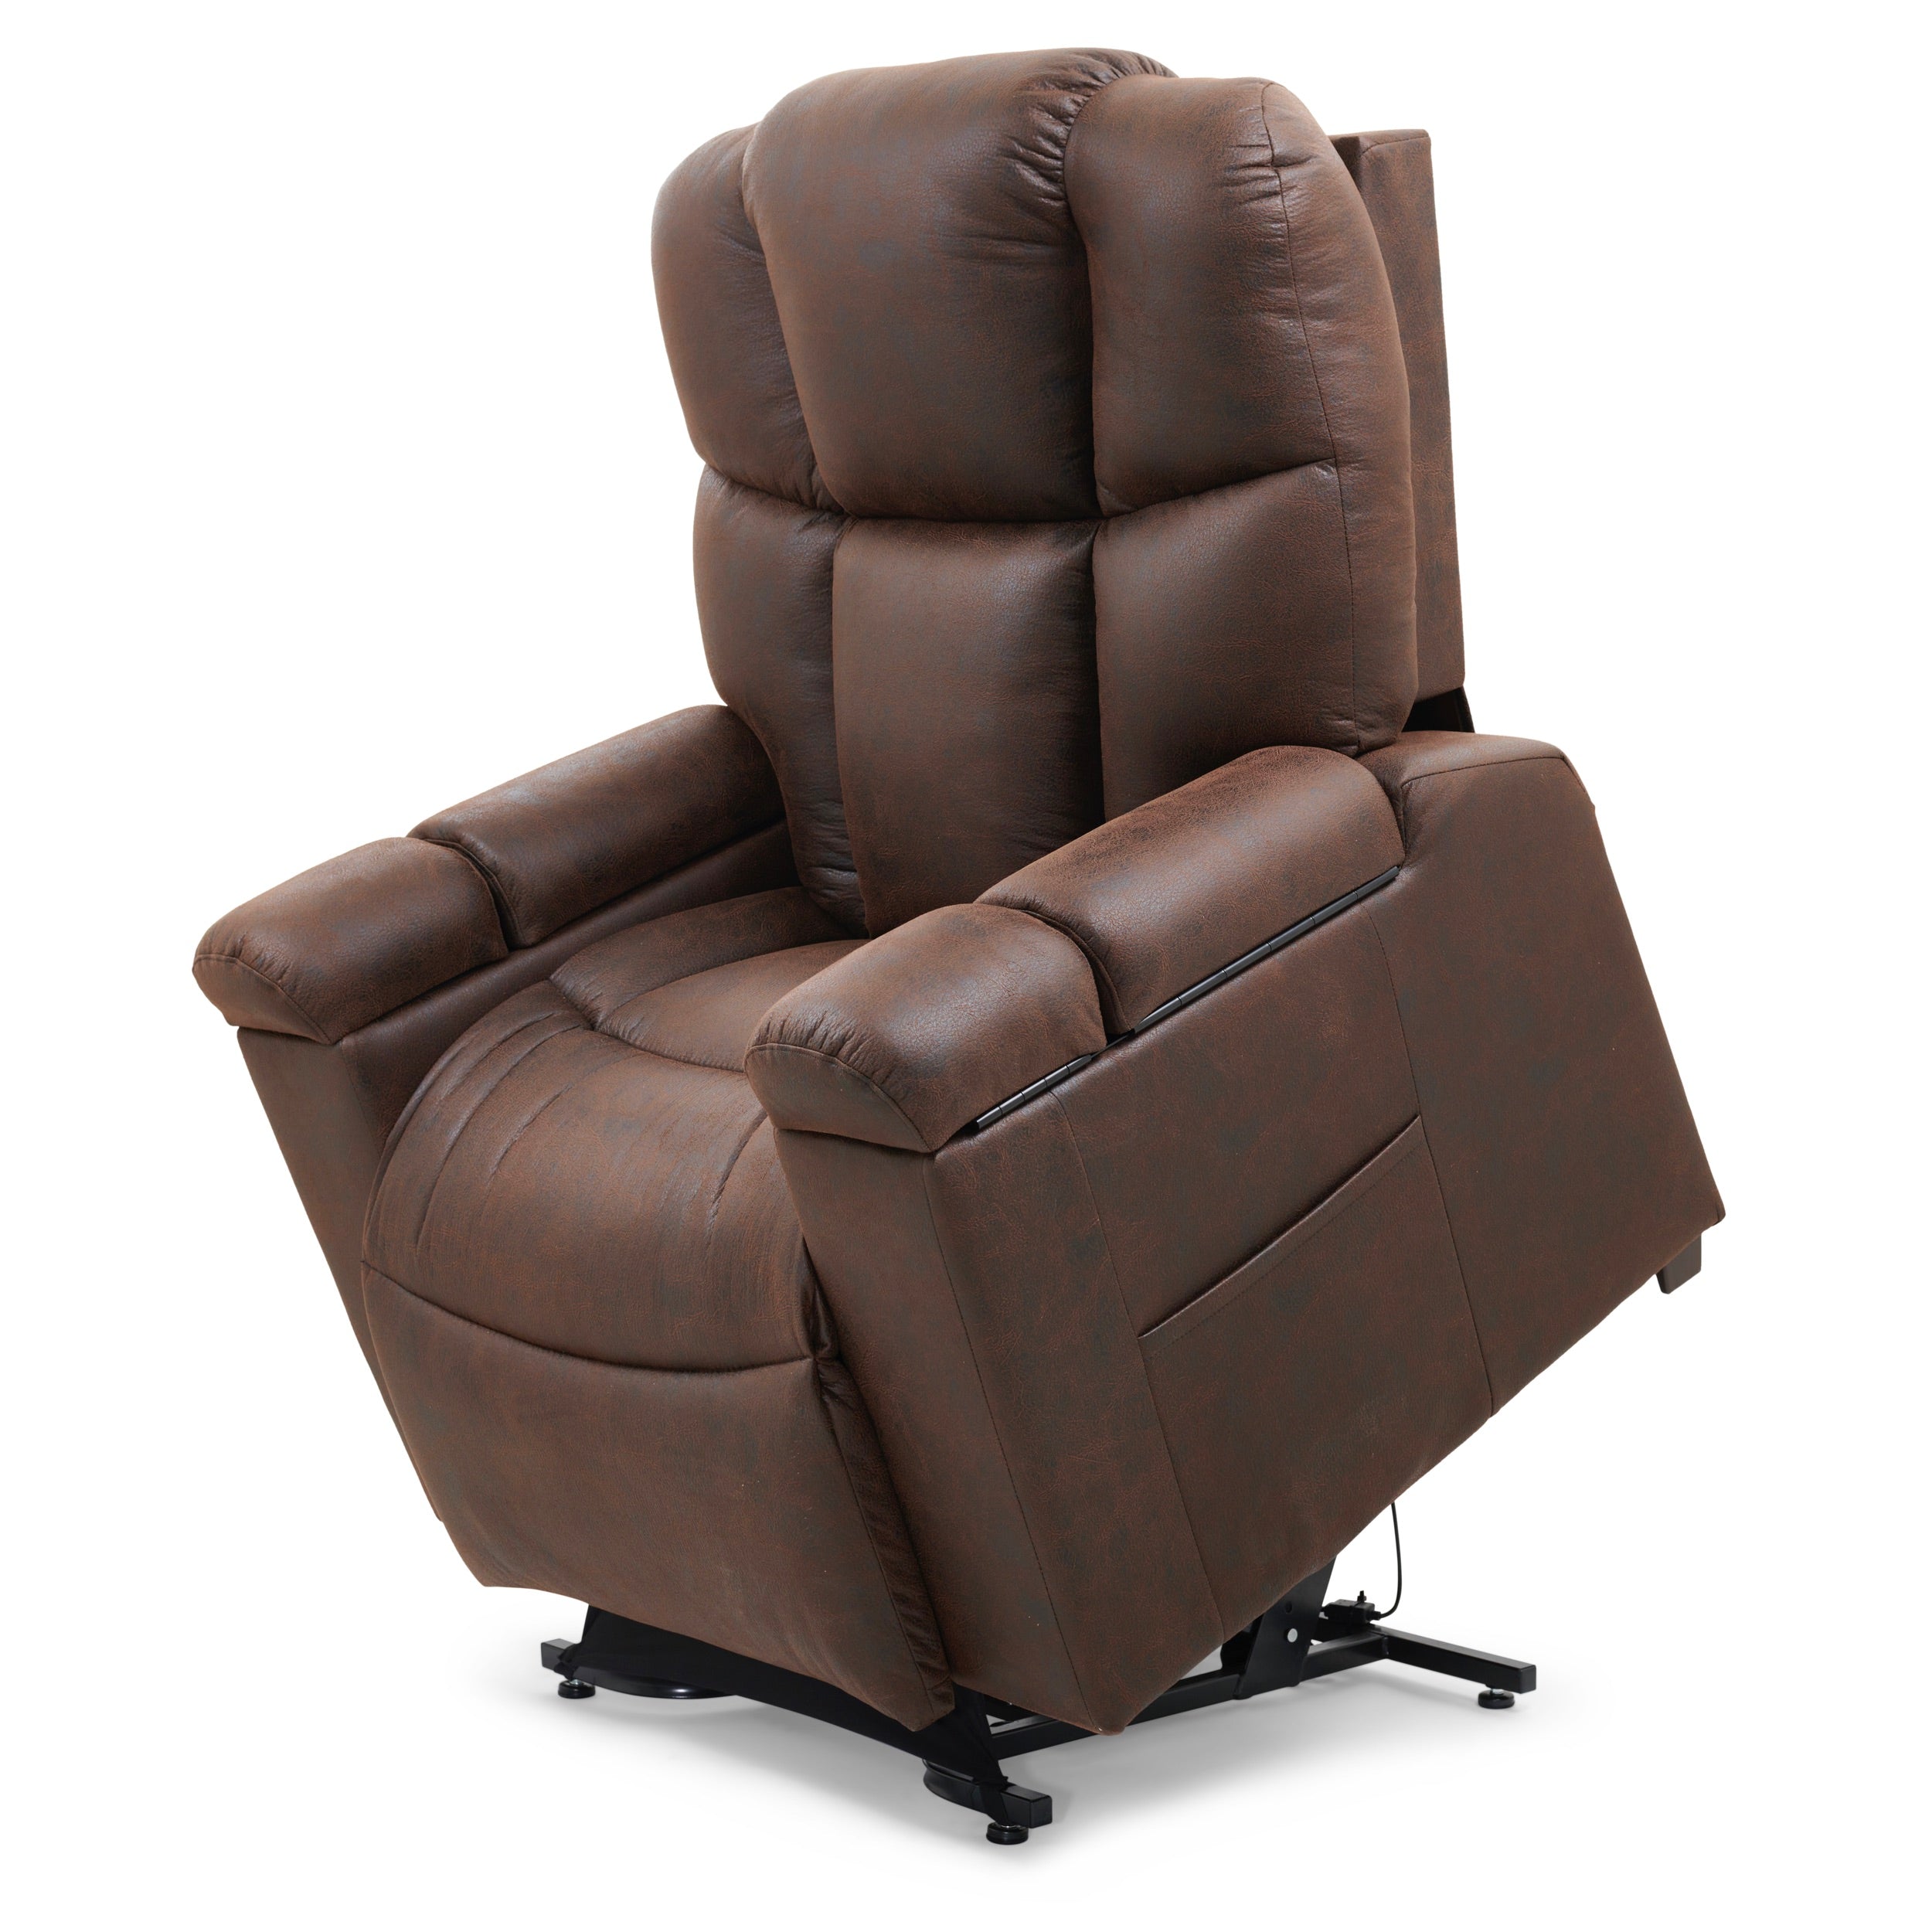 Rigel Lift chair power recliner in lifted position